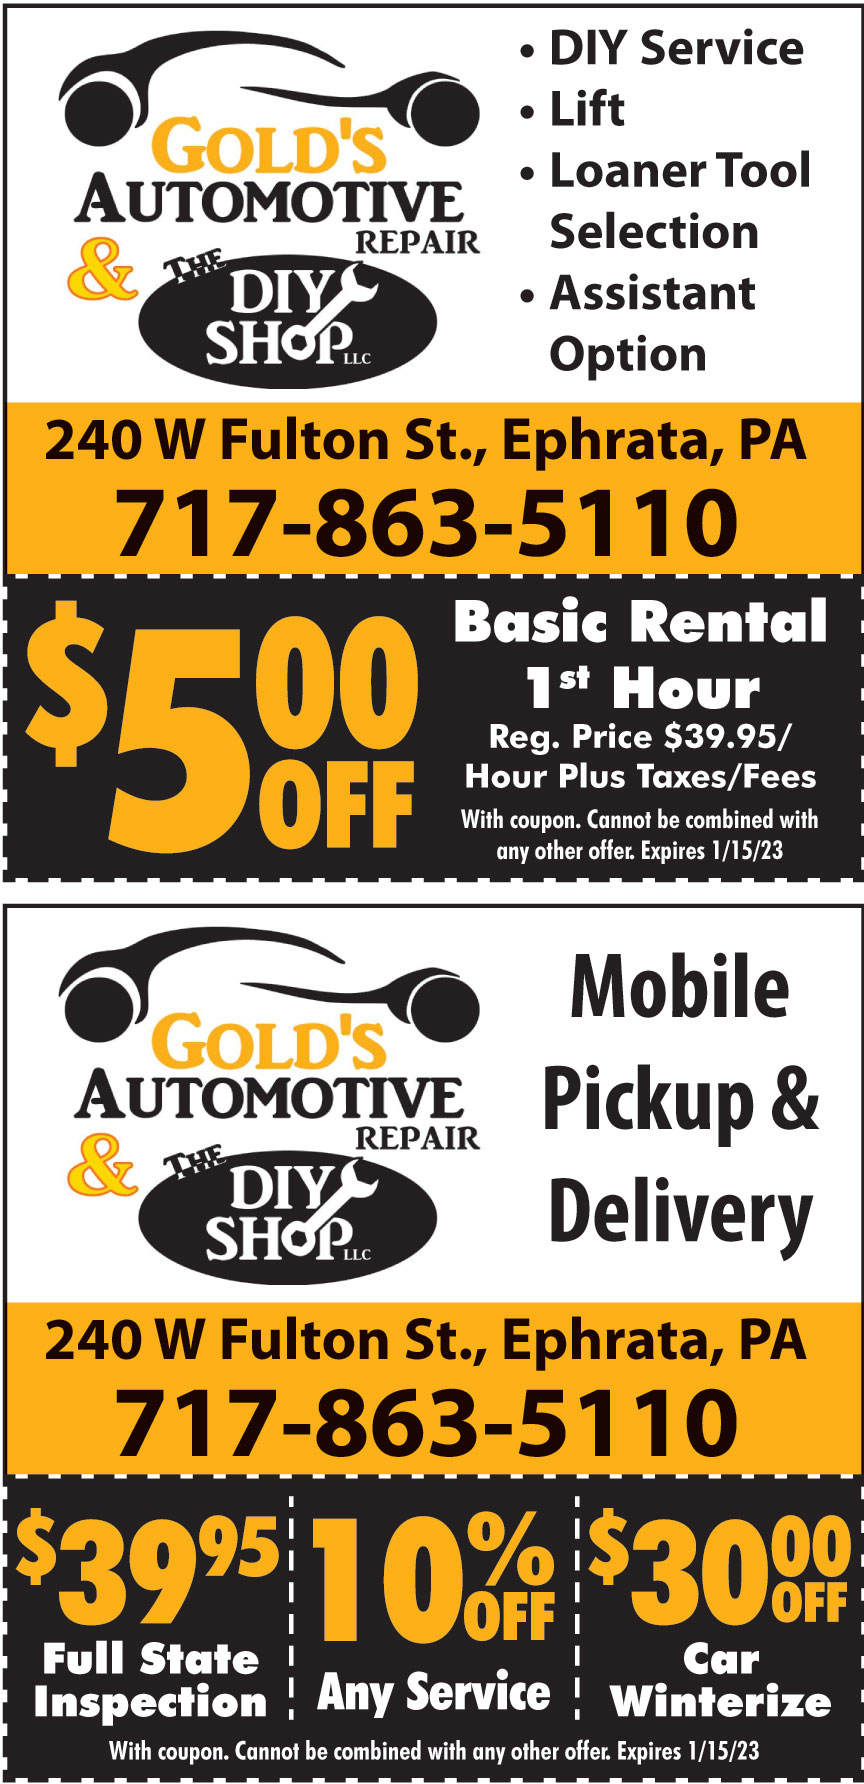 GOLDS AUTOMOTIVE AND DIY